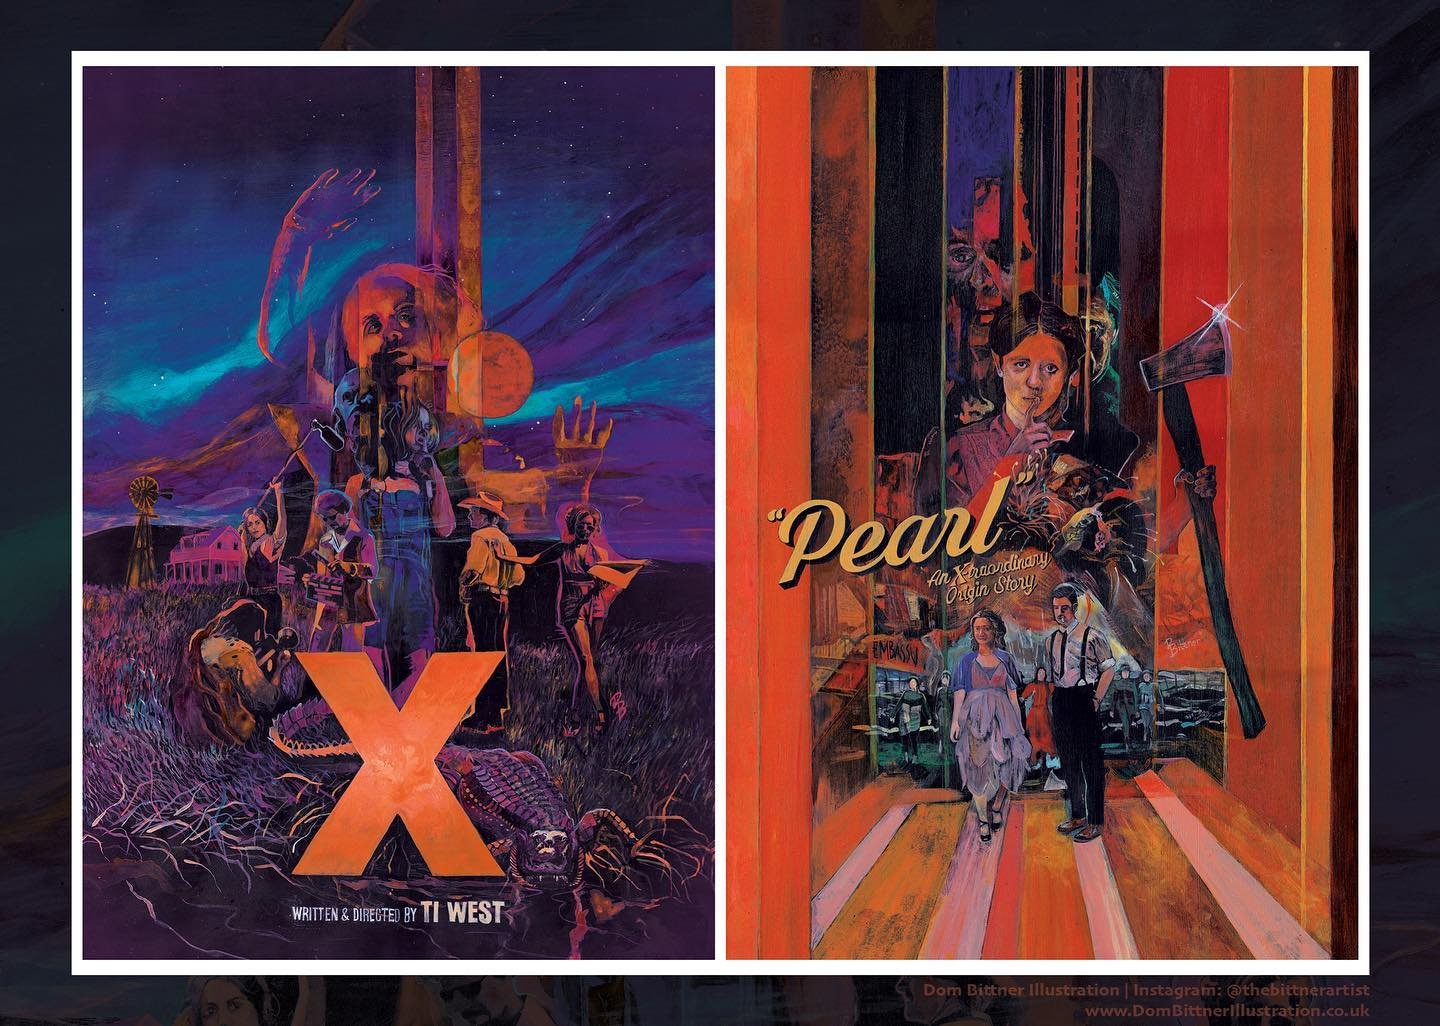 Who&rsquo;s looking forward to MaXXXine? I can&rsquo;t wait! (X and Pearl posters by me). 

#xmovie #pearl #pearlmovie #tiwest #horror #horrorfilm #horrorart #horrorartist #horrorartwork #alternativemovieposters #alternativemovieposter #horrorfilms #